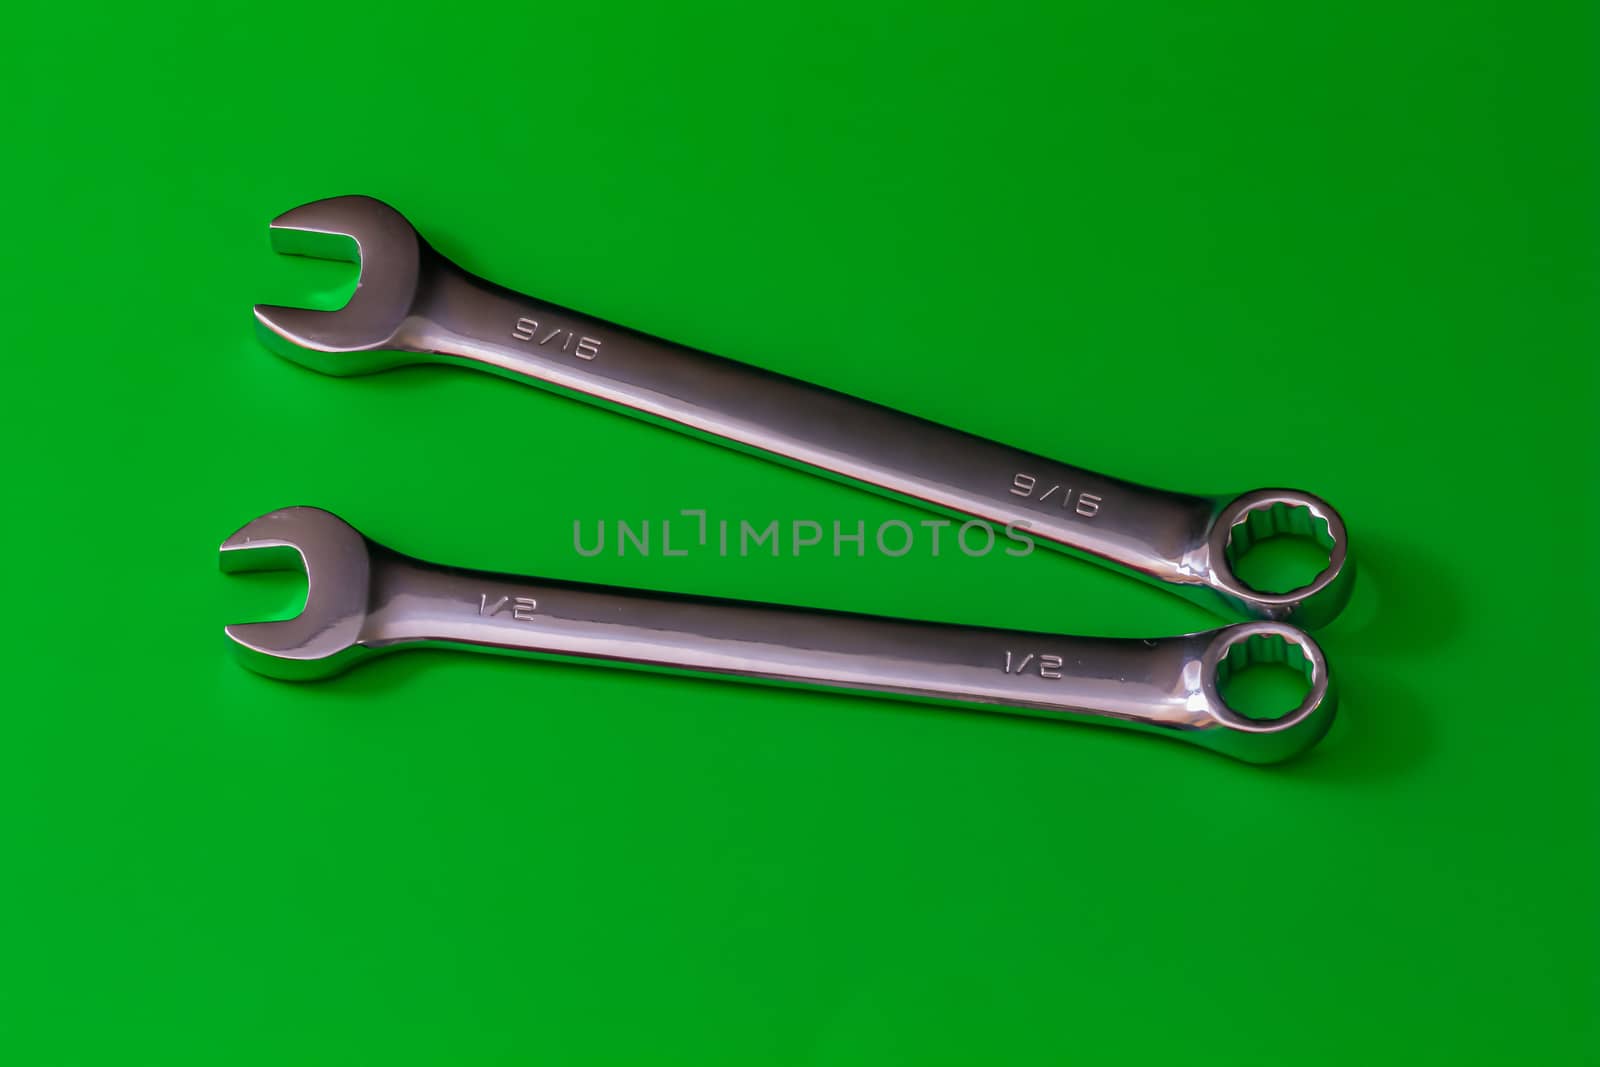 A pair of stainless steel wrenches, combination spanners with both an open end and a box end, lie on a solid green background. their sizes are engraved as fractions of an inch at 1/2" and 9/15".